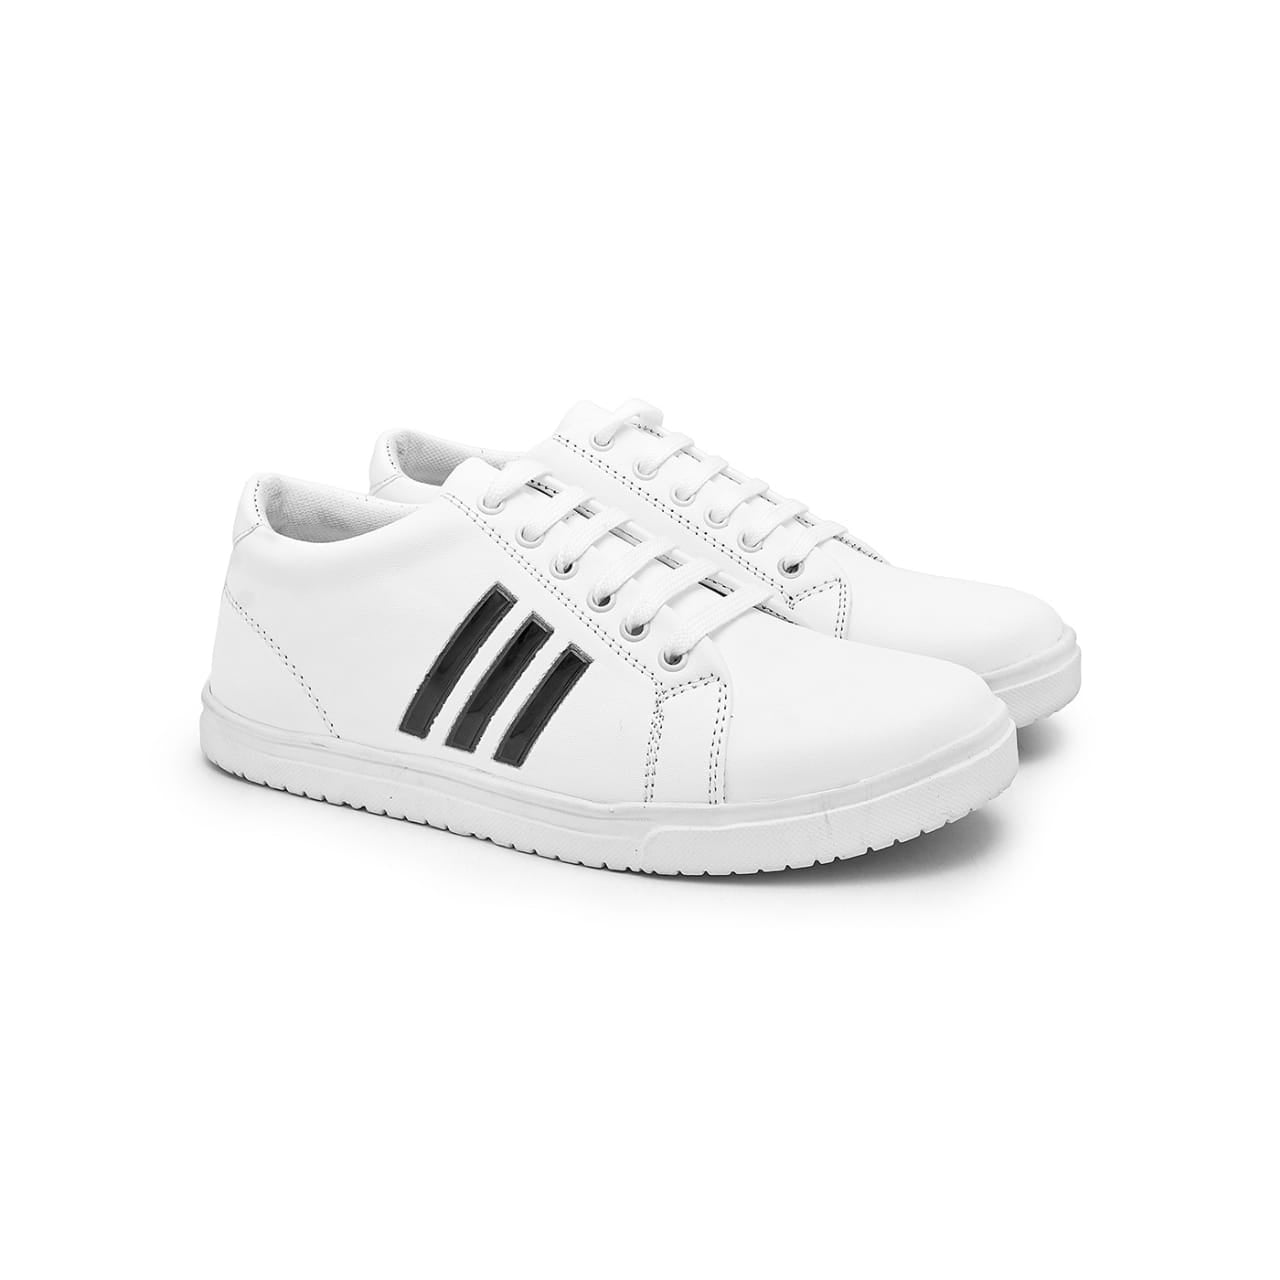 White Plain Sneaker Shoes With Side Black Line 001